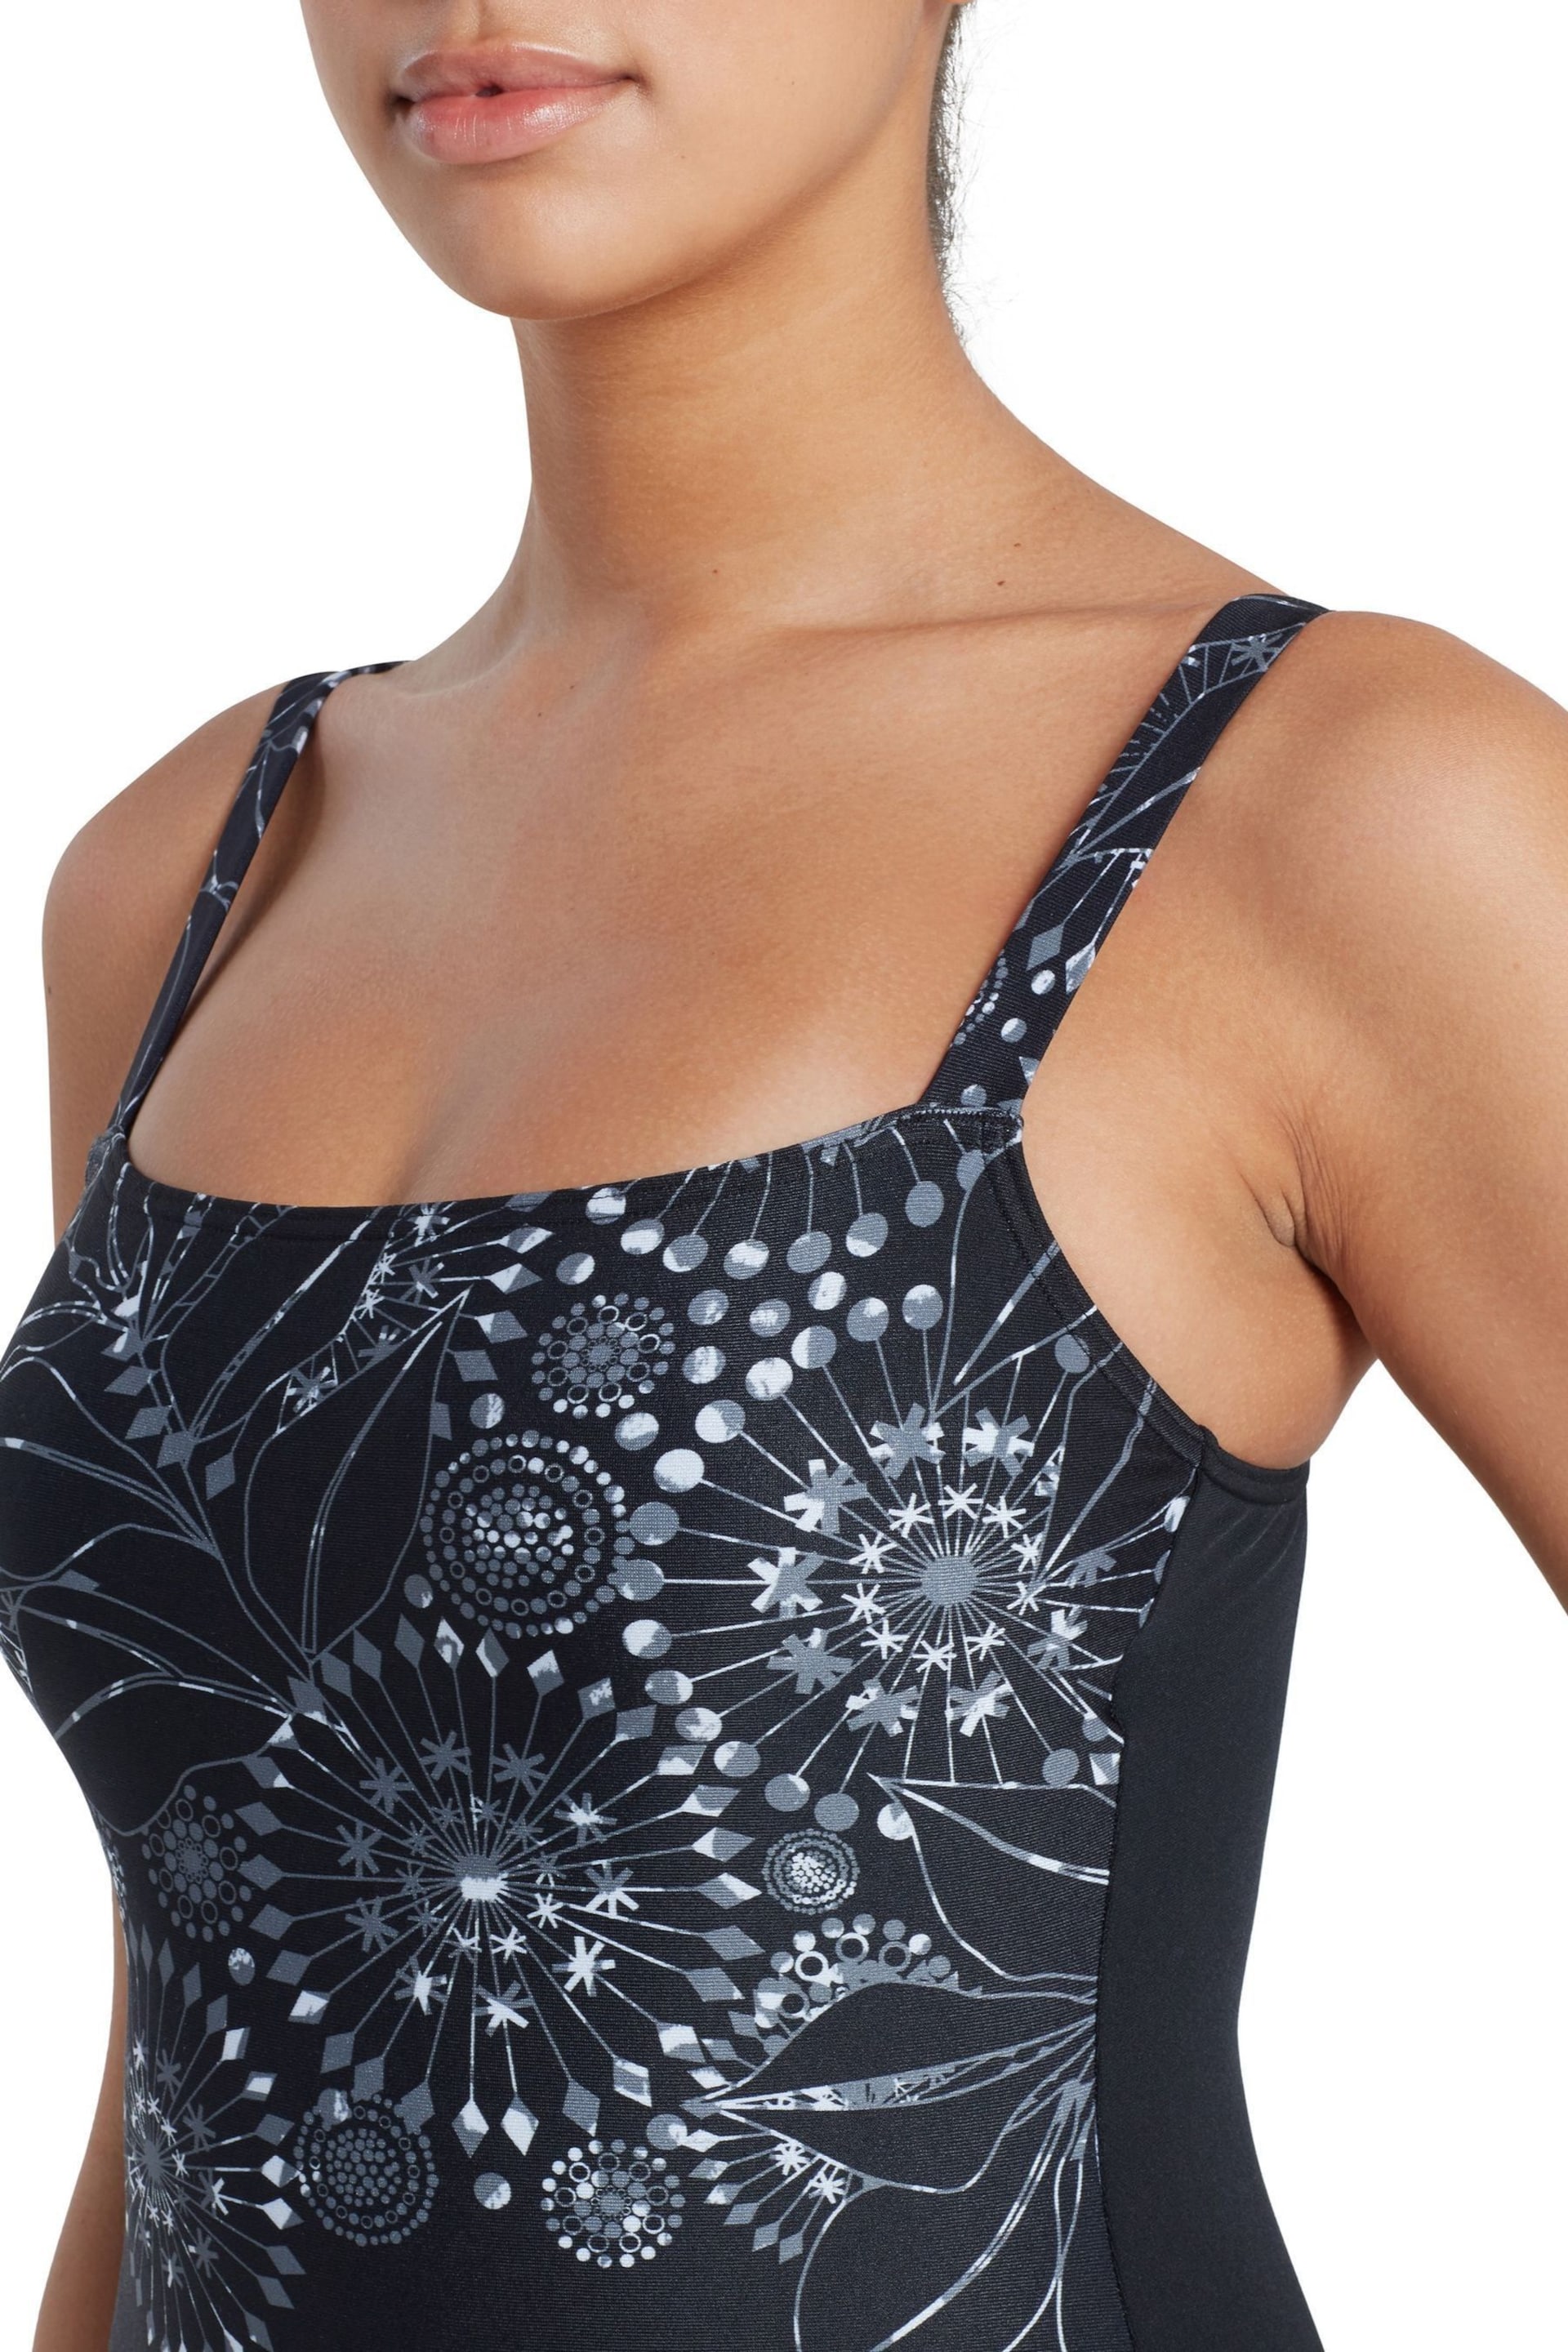 Zoggs Adjustable Classicback One Piece Swimsuit with Foam Cup Support - Image 5 of 8